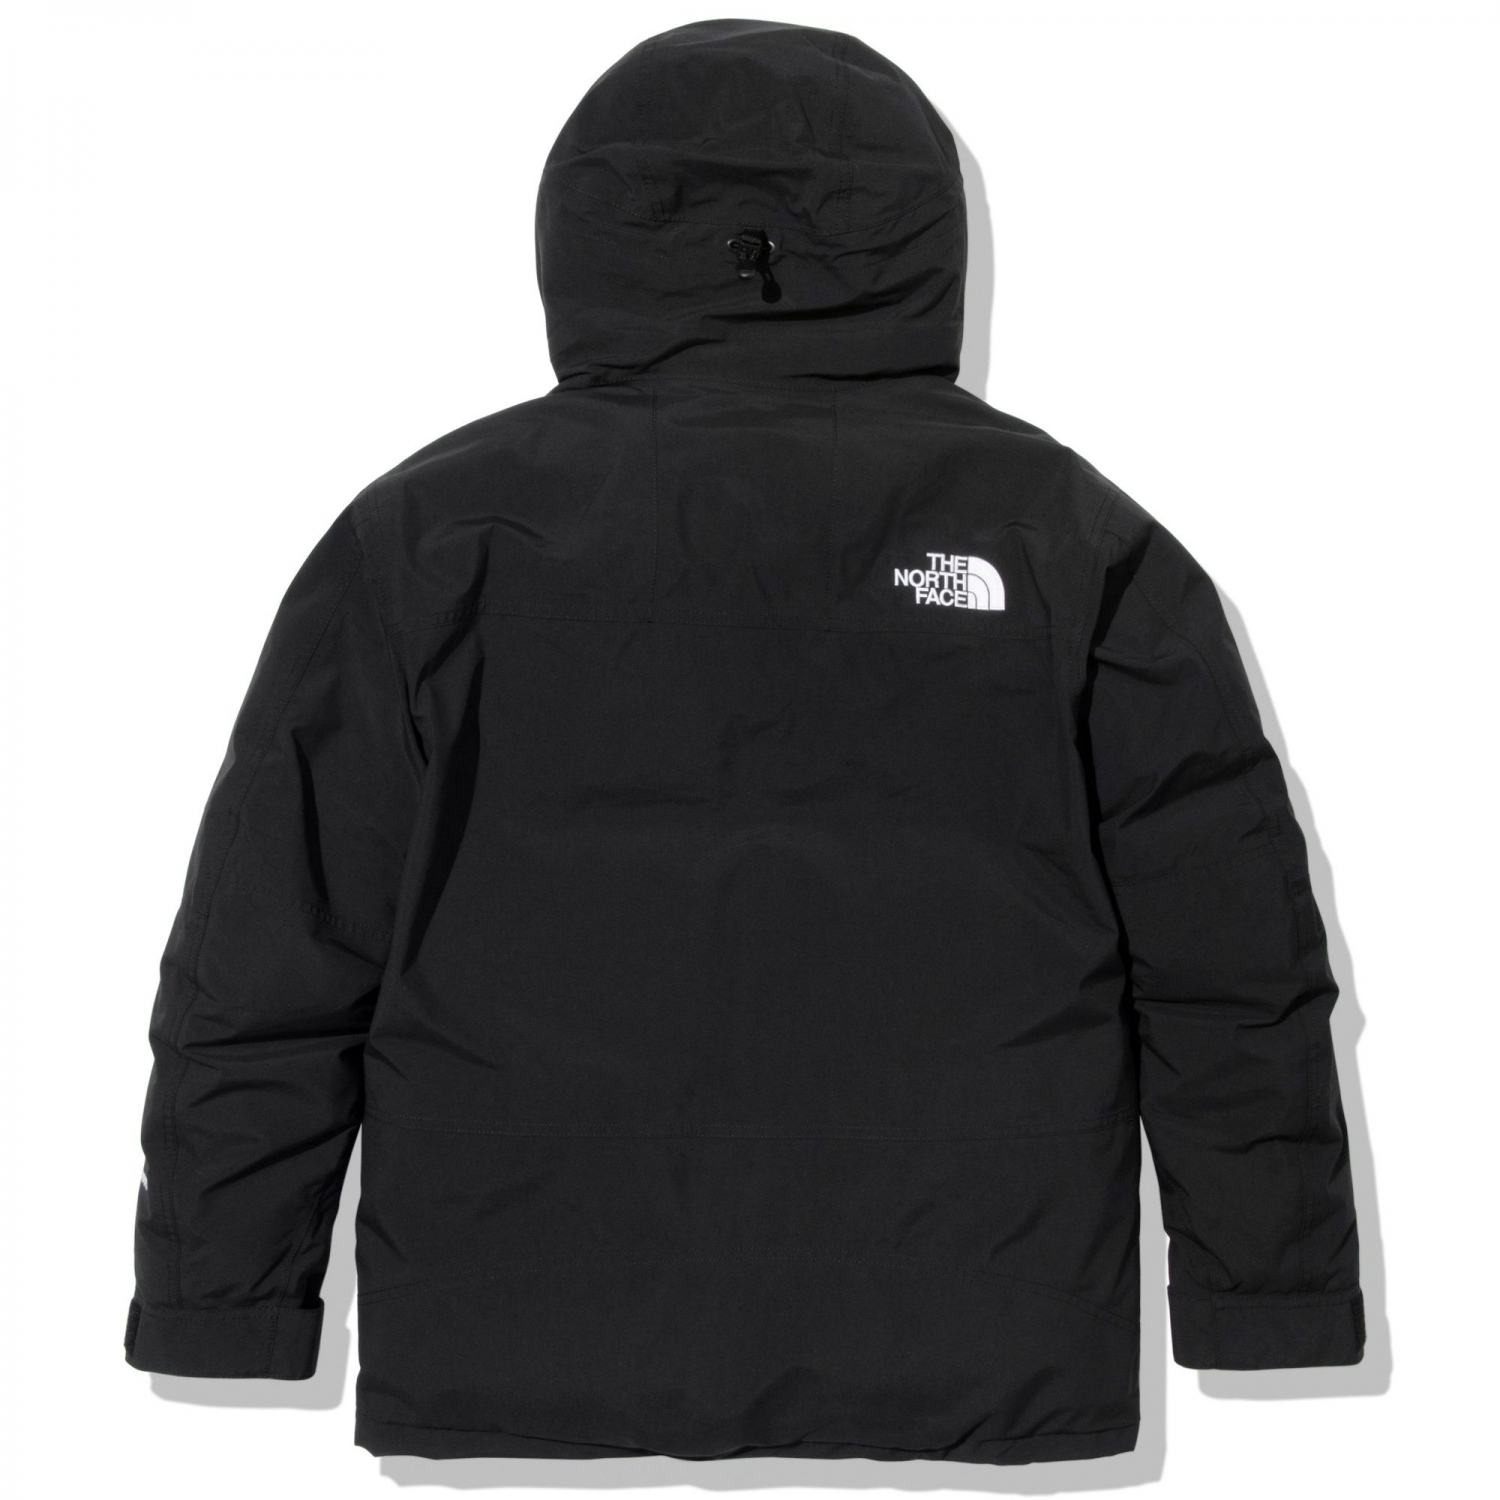 THE NORTH FACE / ザ ノース フェイス | Mountain Down Jacket - K